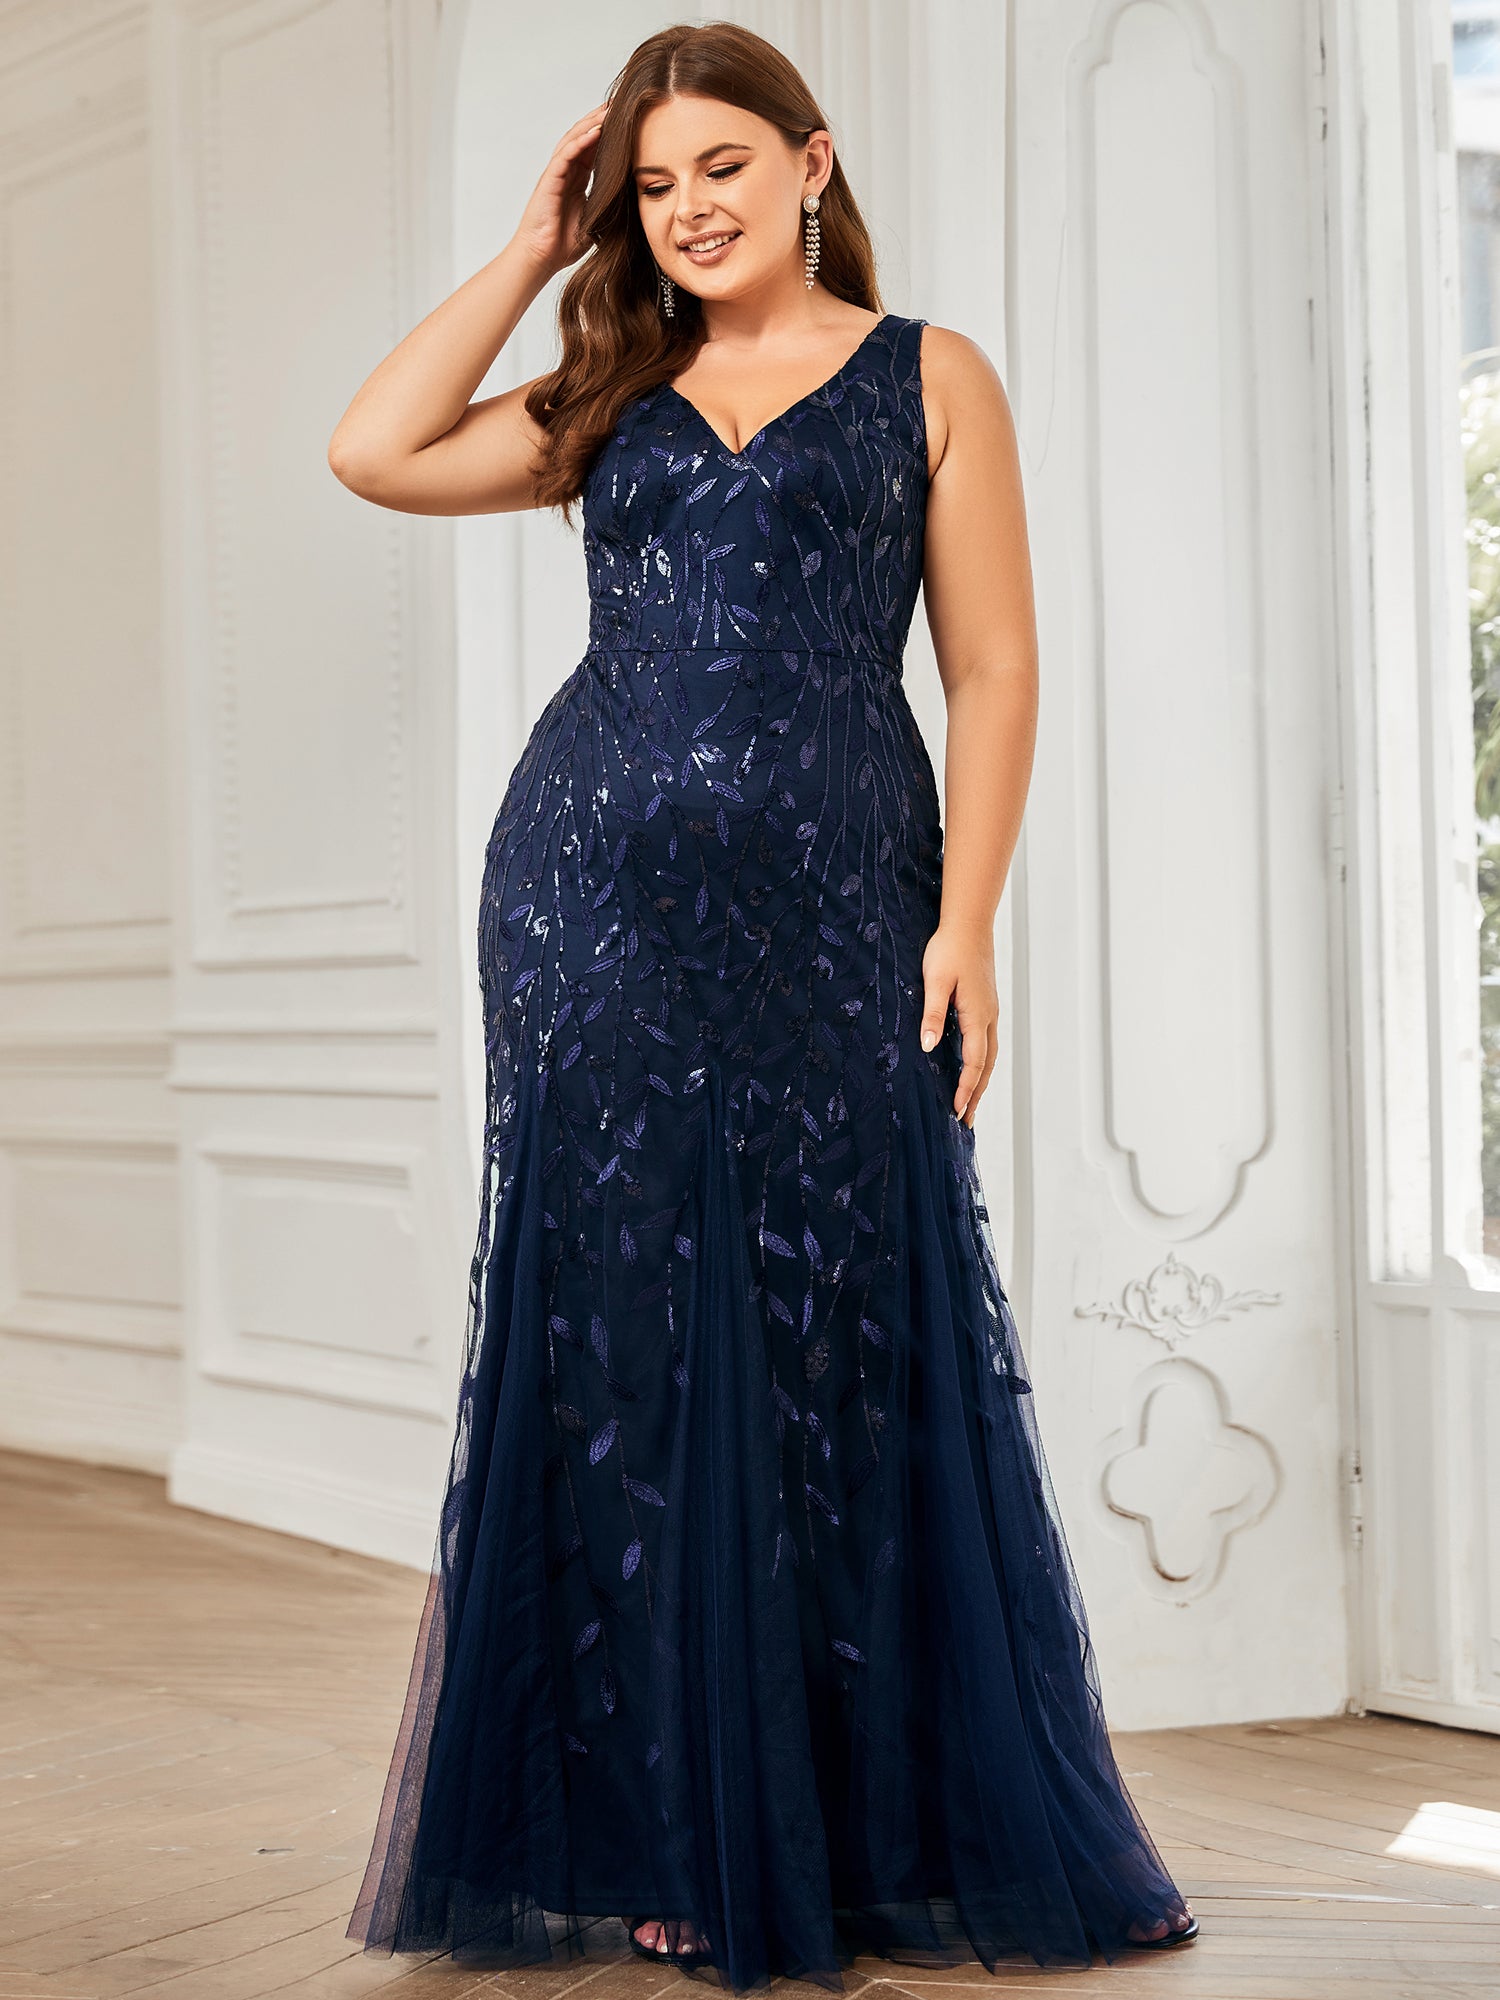 What Are the Most Flattering Mother Dresses for Plus Size 2024 on Ever Pretty?